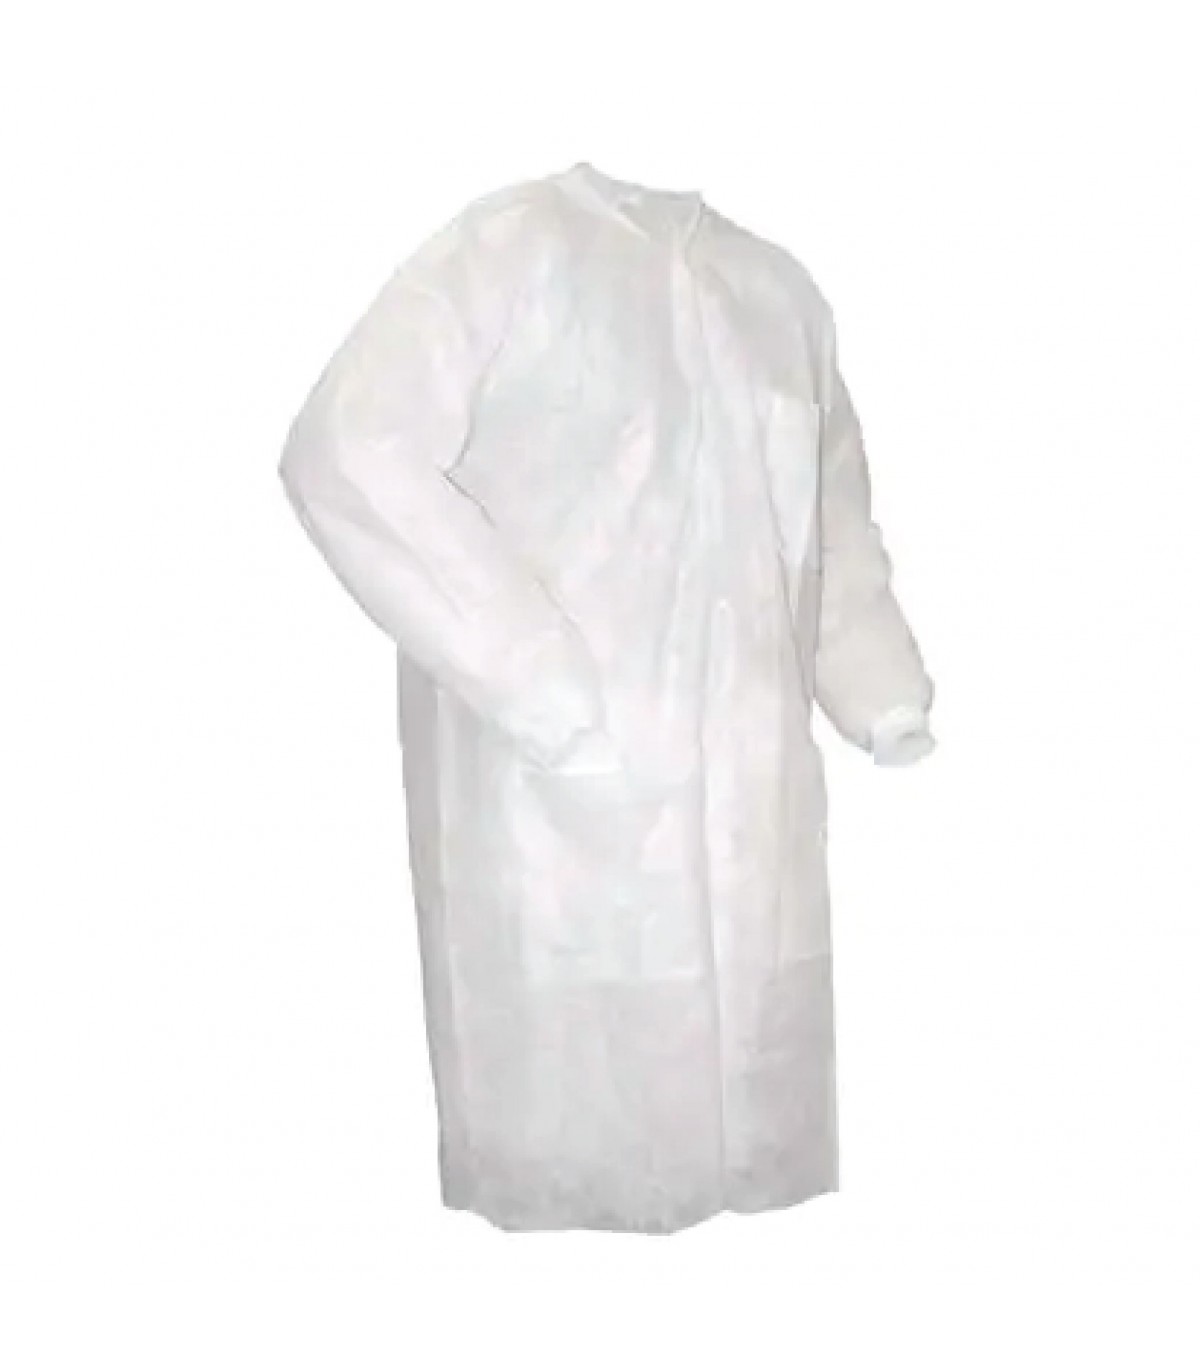 Buy Non-woven Lab Coats, White | Econo Green | One-stop shop for all ...